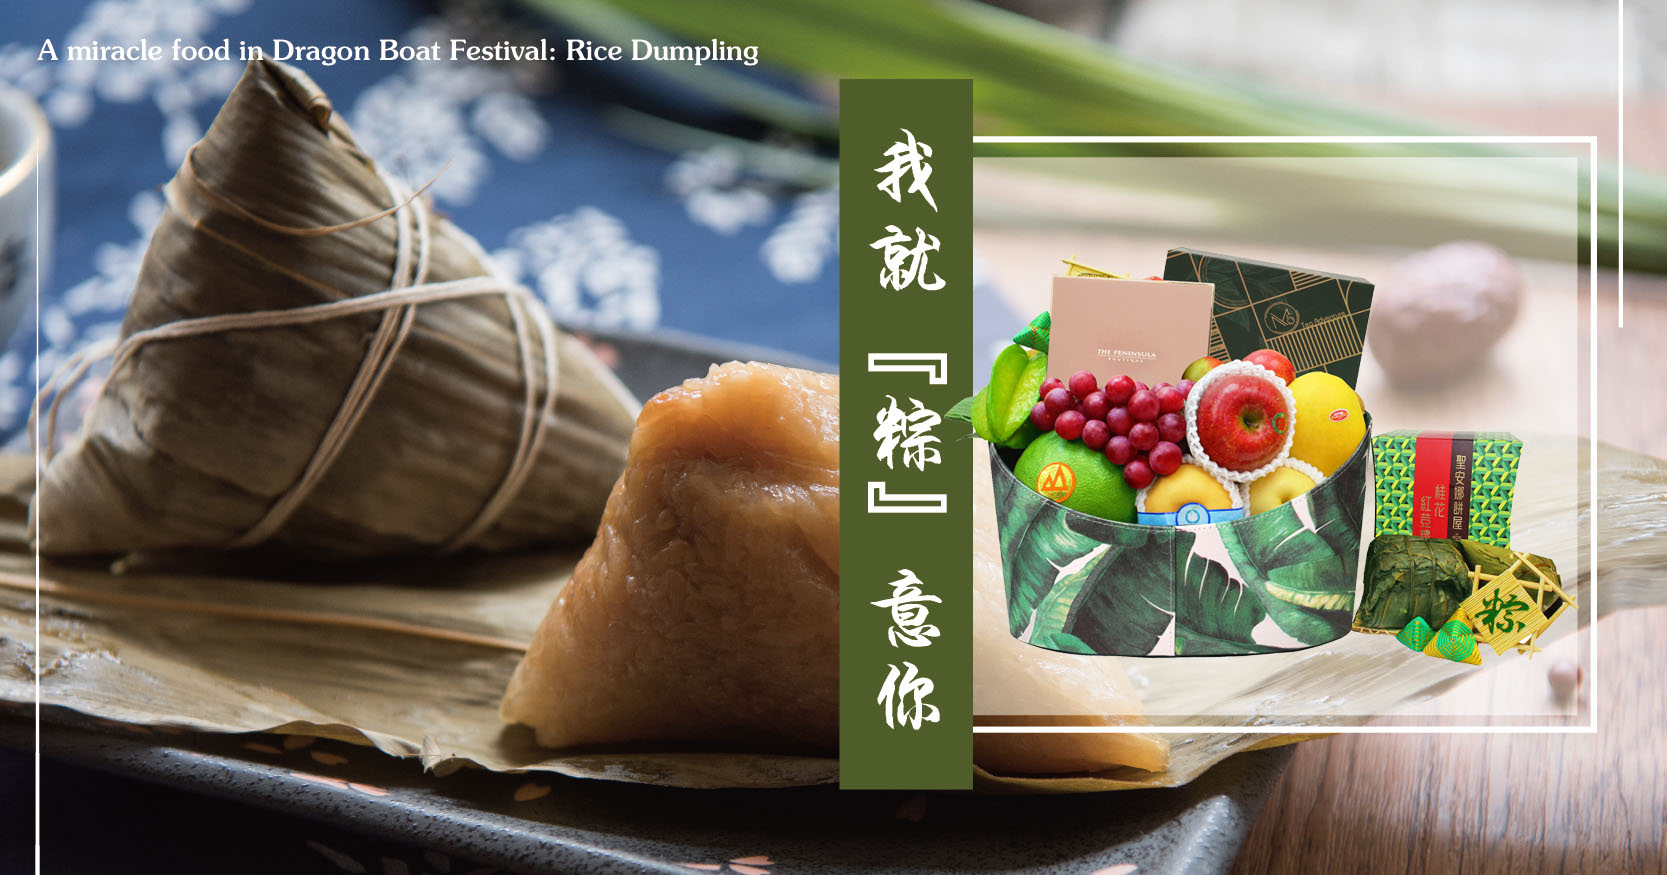 A miracle food in Dragon Boat Festival: Rice Dumpling